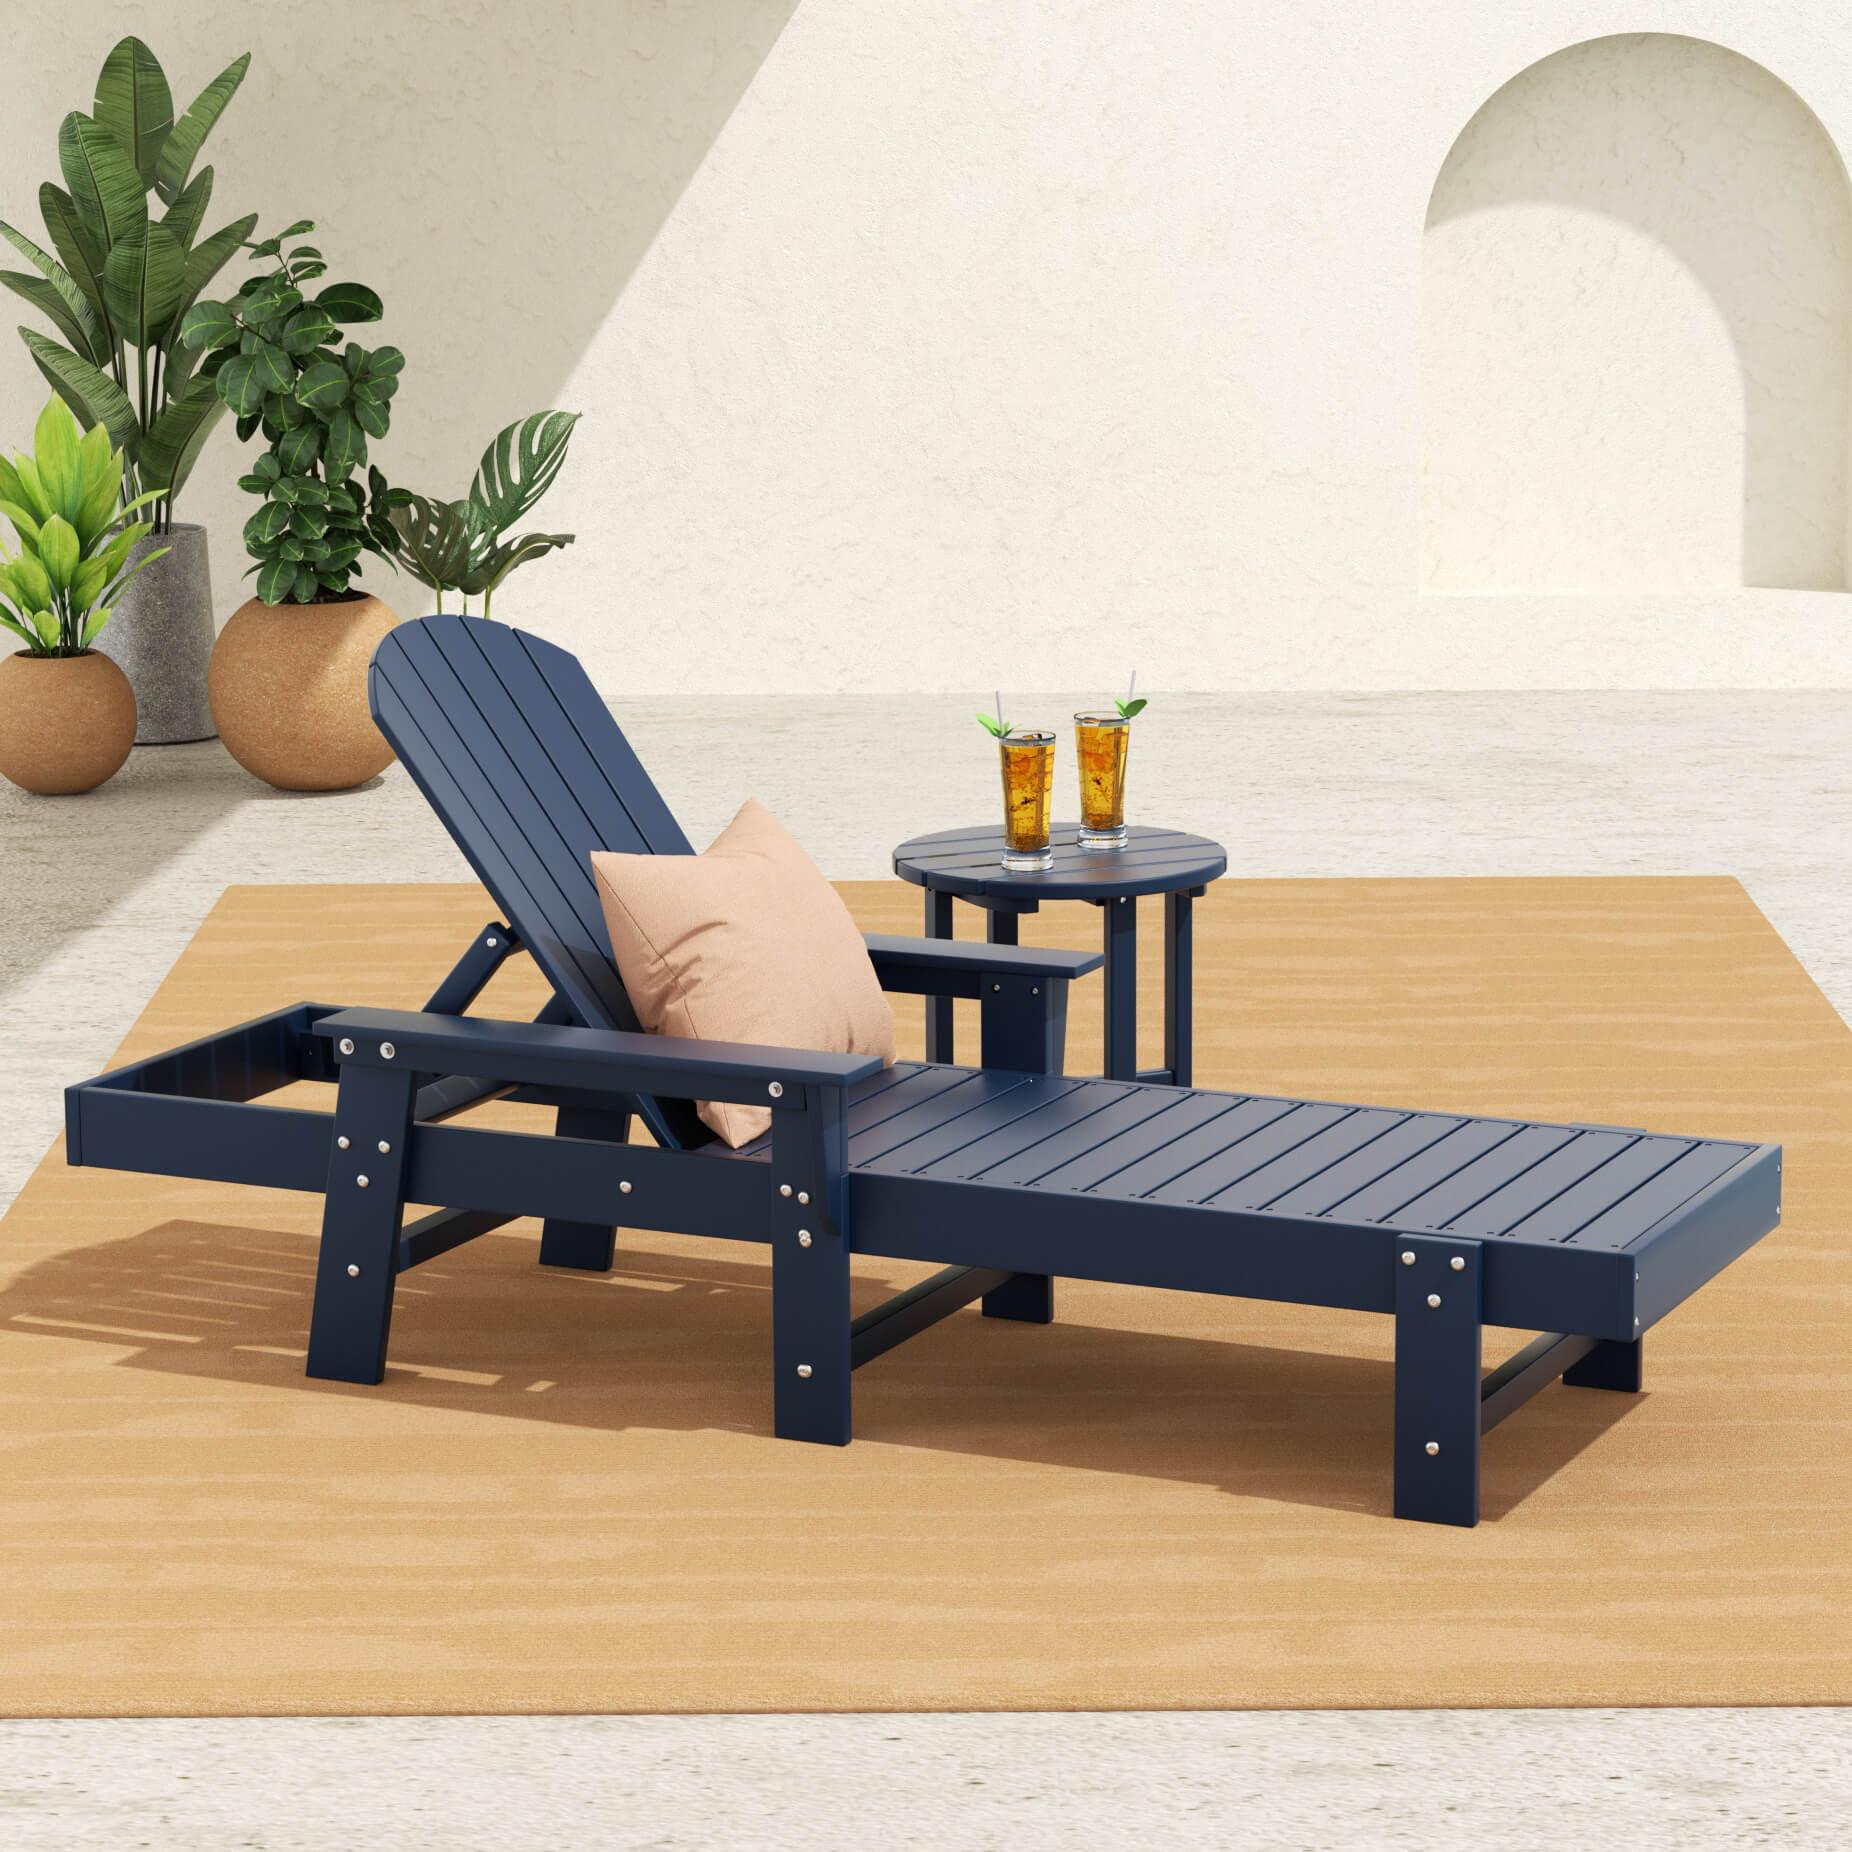 Chaise Lounges - Costaelm